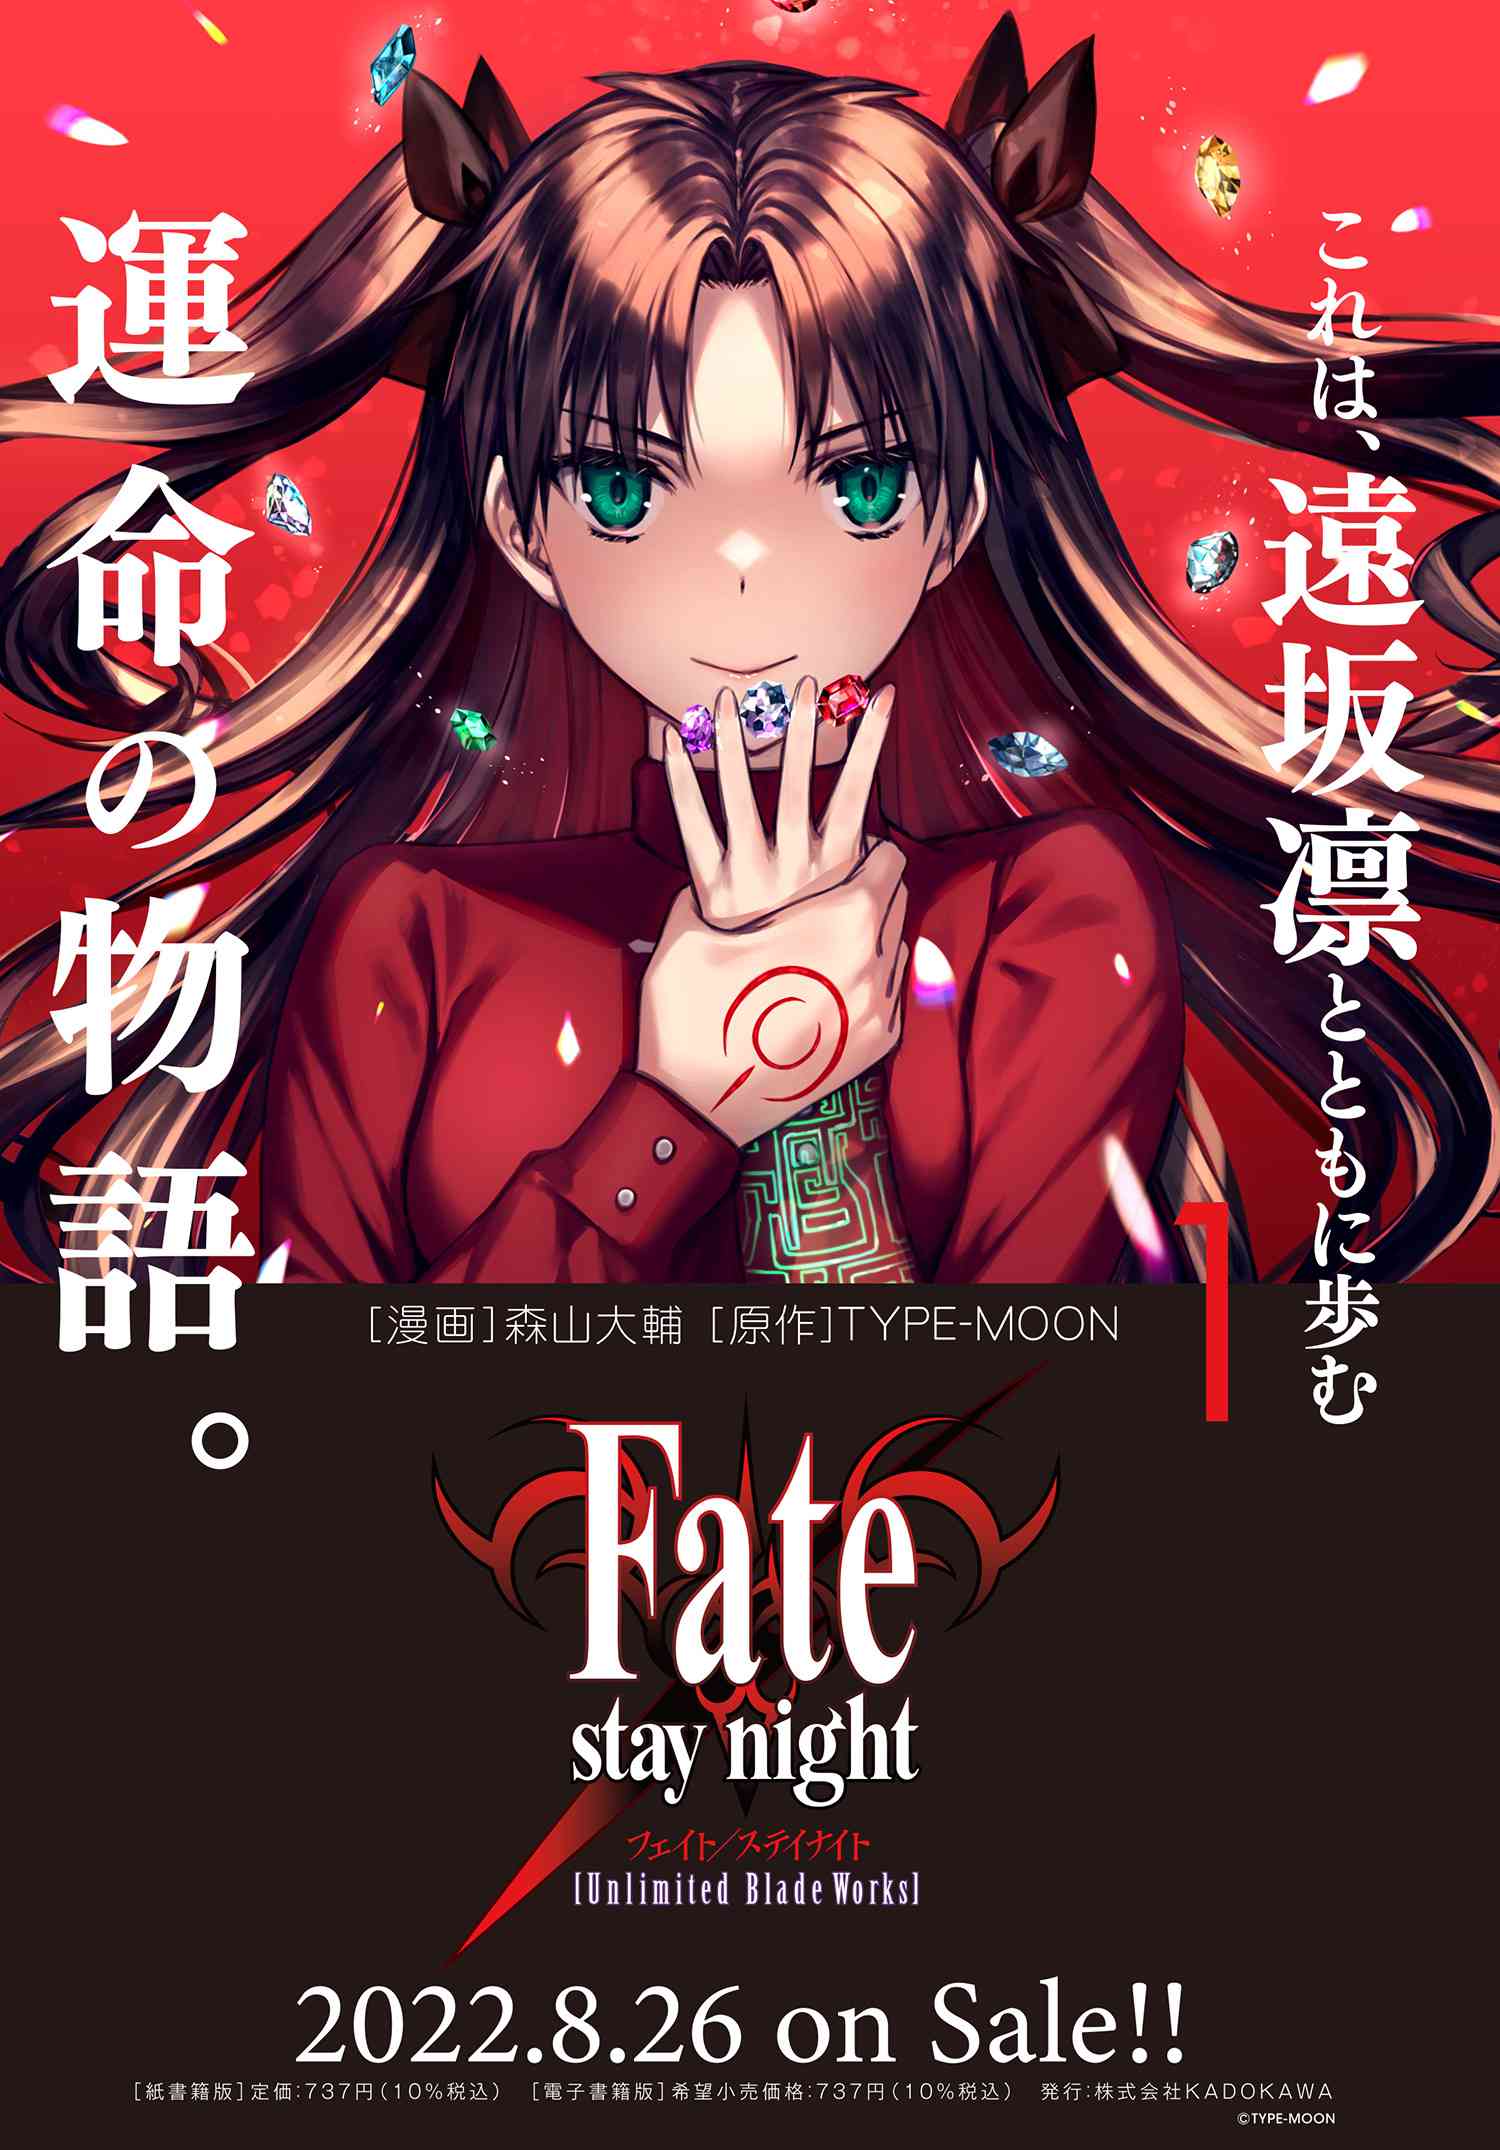 Fate Stay Night Unlimited Blade Works 7 1 Type Moonコミックエース 無料で漫画が読めるオンラインマガジン